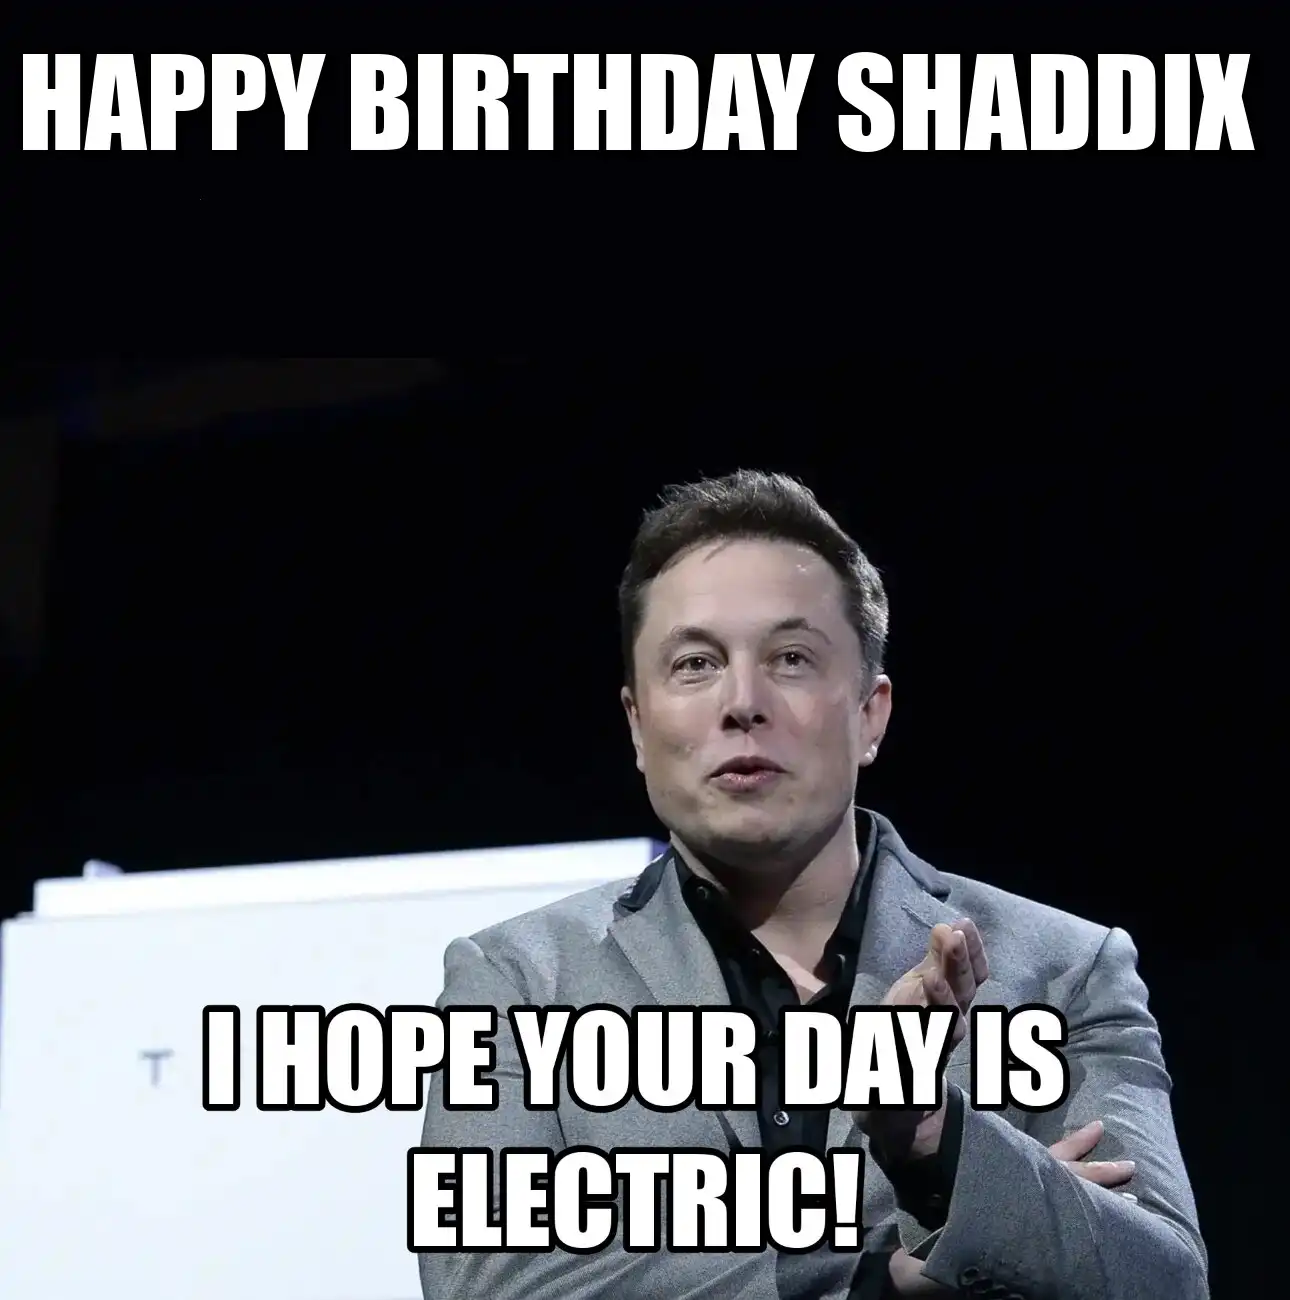 Happy Birthday Shaddix I Hope Your Day Is Electric Meme